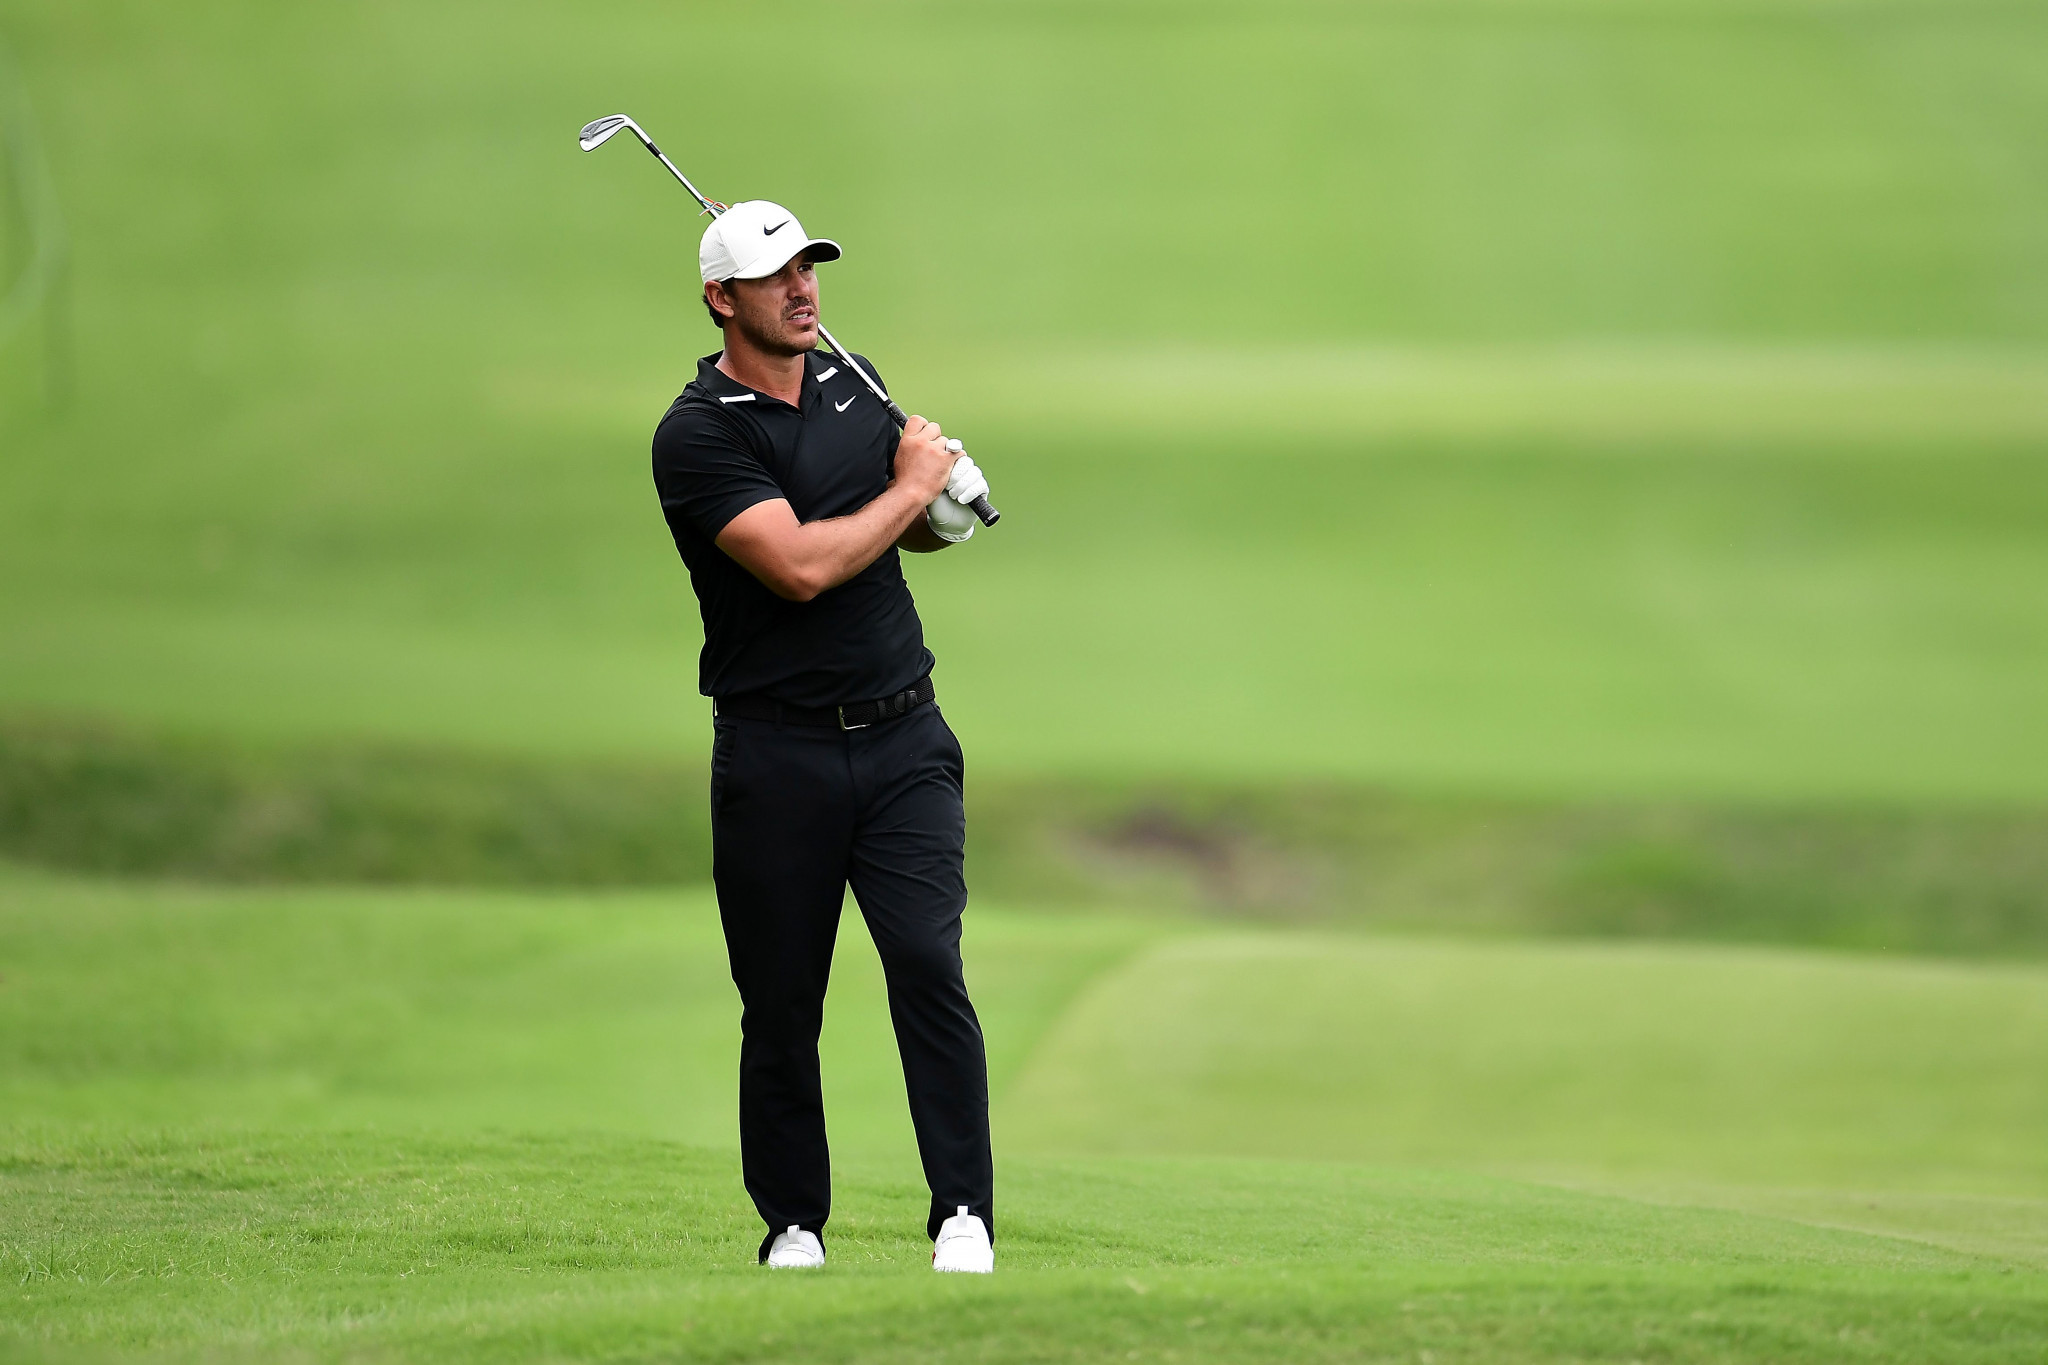 Overnight leader Brooks Koepka is now in a tie for third place after shooting a second-round 71 ©Getty Images